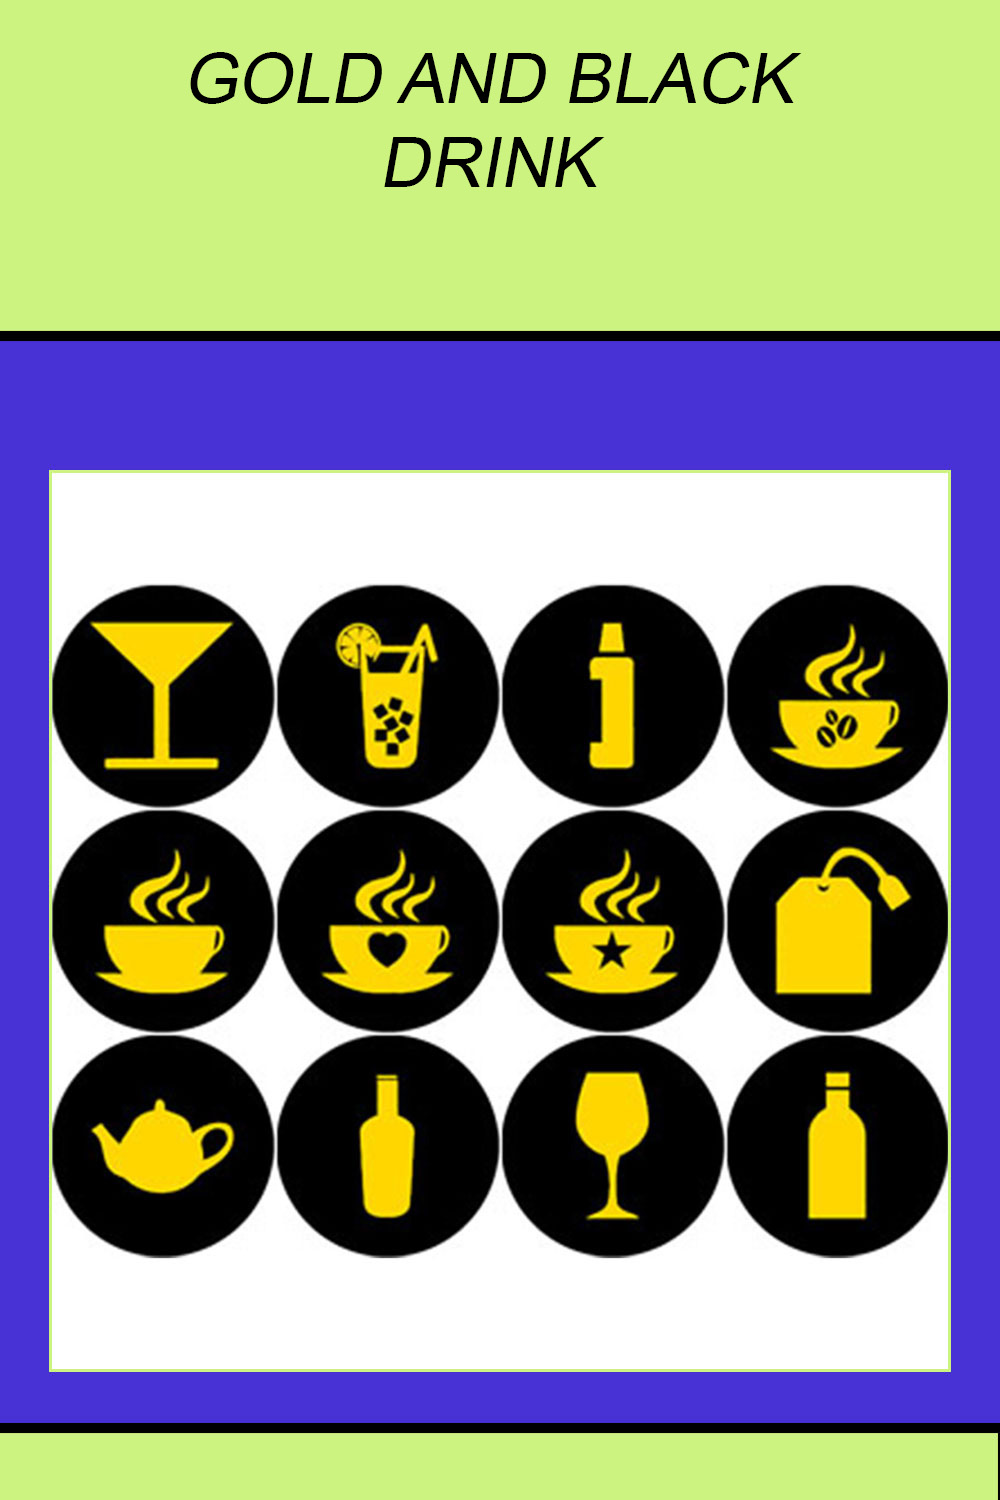 GOLD AND BLACK DRINK ROUND ICONS pinterest preview image.